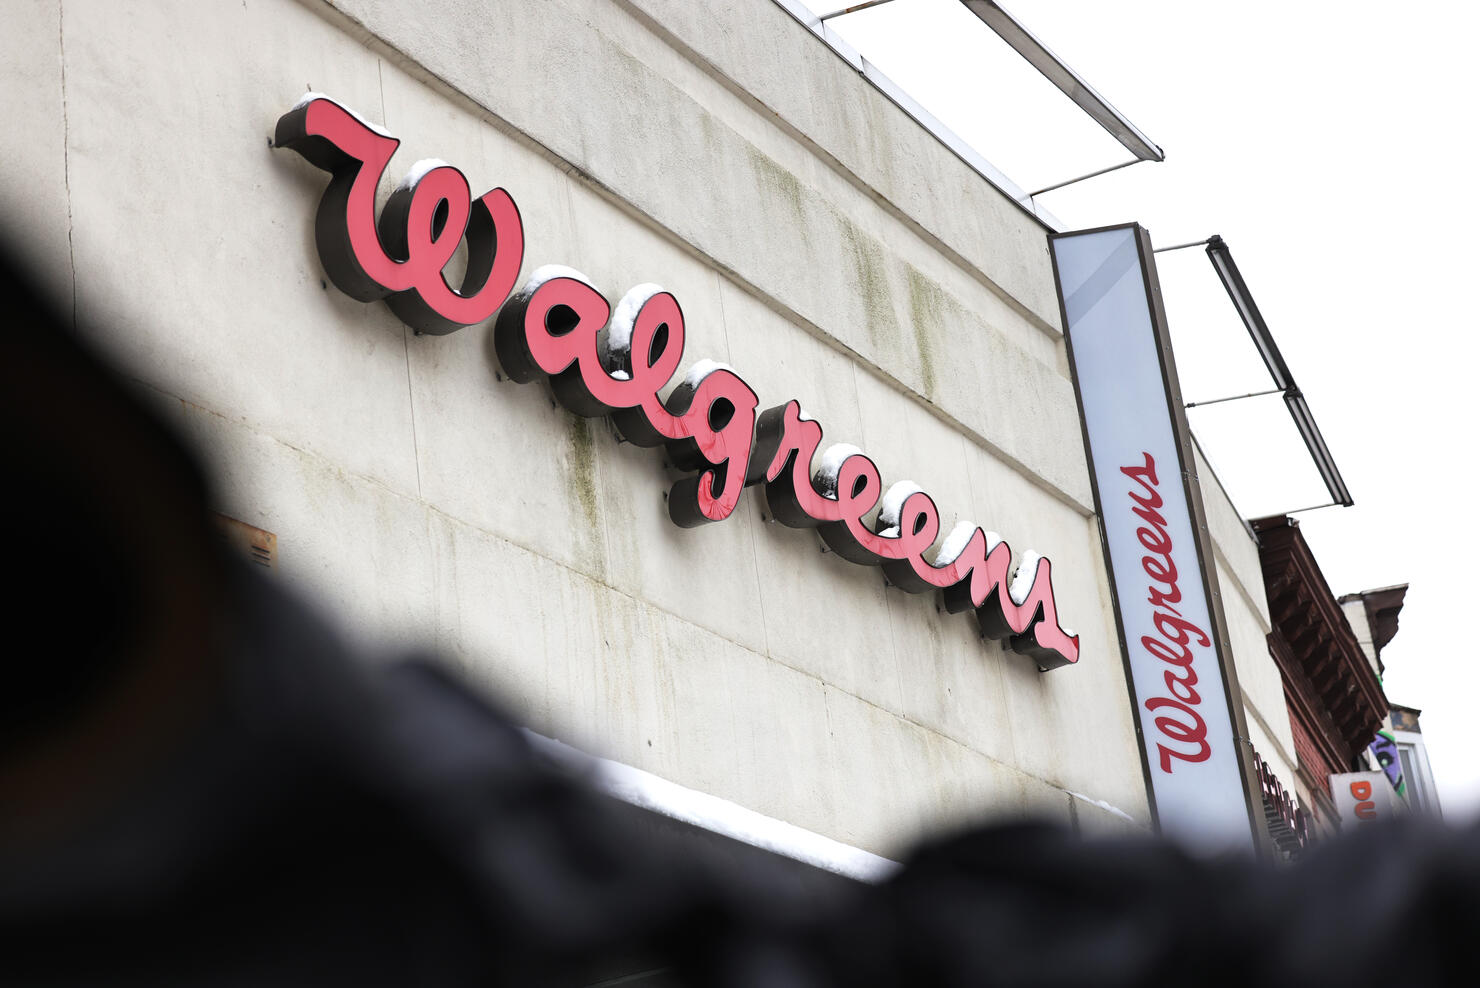 Walgreens To Partner With Uber To Offer Free Rides For Vaccinations